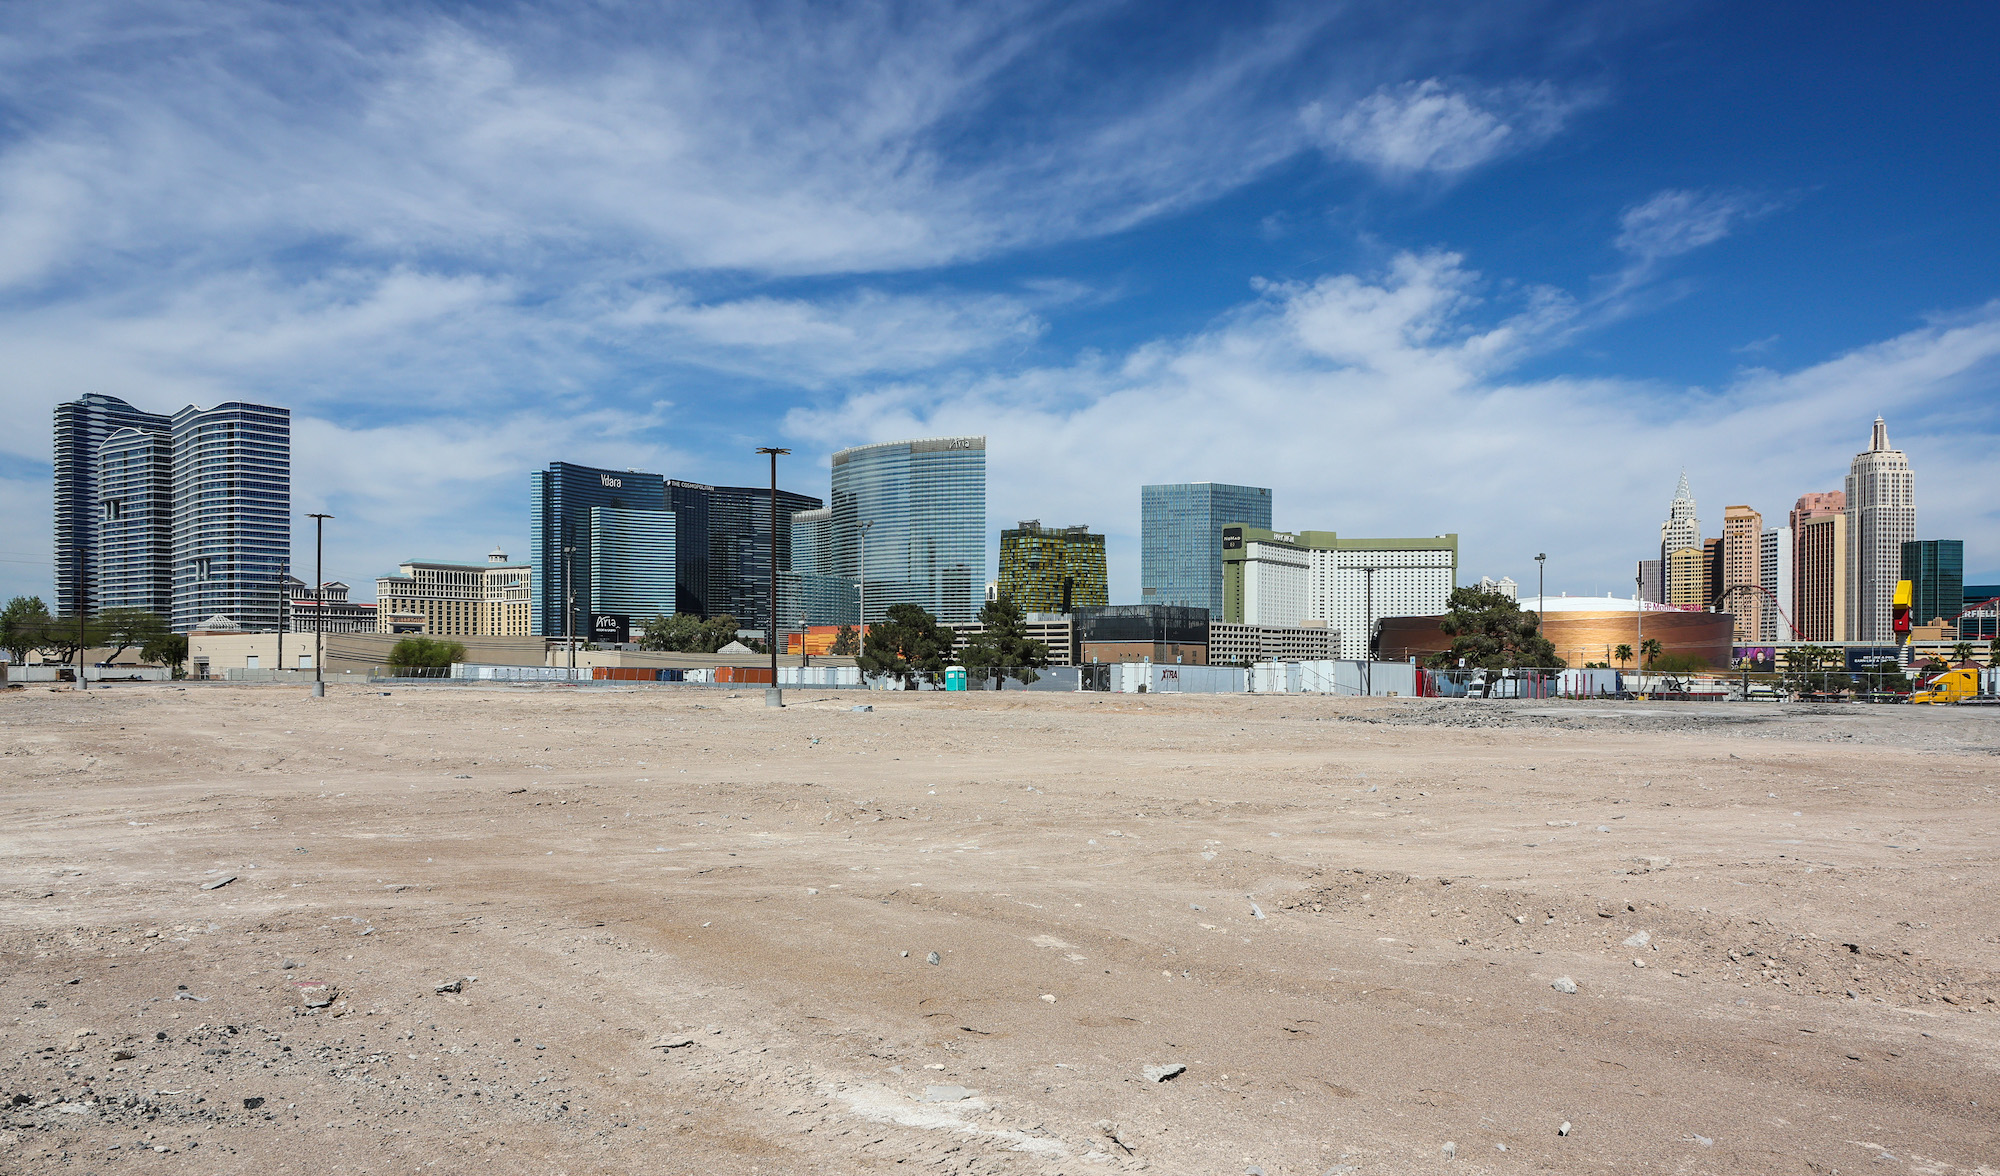 LAS VEGAS, NEVADA - APRIL 21: A view shows the Las Vegas Strip behind the site that the Oakland Athletics agreed in principle to purchase from Red Rock Resorts Inc. for a potential new ballpark on April 21, 2023 in Las Vegas, Nevada. The A's President Dave Kaval said the deal for the 49-acre plot of land, formerly the home of Wild Wild West Gambling Hall &amp; Hotel, could be used to relocate the Major League Baseball franchise from Oakland to Las Vegas. The team will now work on a public-private partnership to build a USD 1.5 billion, 30,000-to-35,000-seat, partially retractable-roof stadium in time for the 2027 season. (Photo by Ethan Miller/Getty Images)